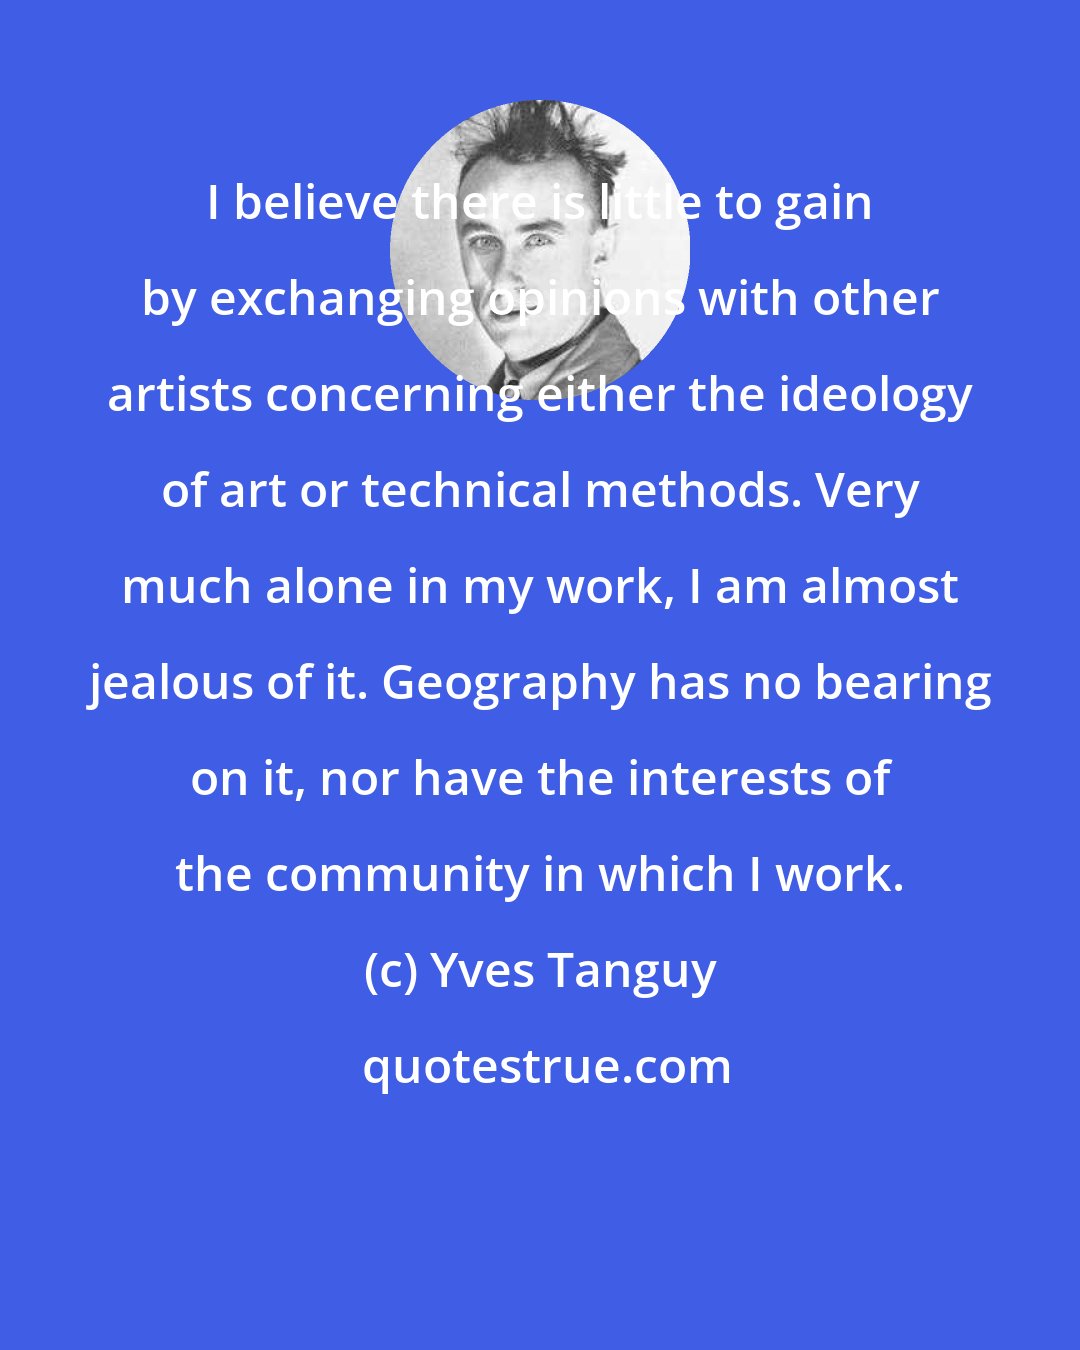 Yves Tanguy: I believe there is little to gain by exchanging opinions with other artists concerning either the ideology of art or technical methods. Very much alone in my work, I am almost jealous of it. Geography has no bearing on it, nor have the interests of the community in which I work.